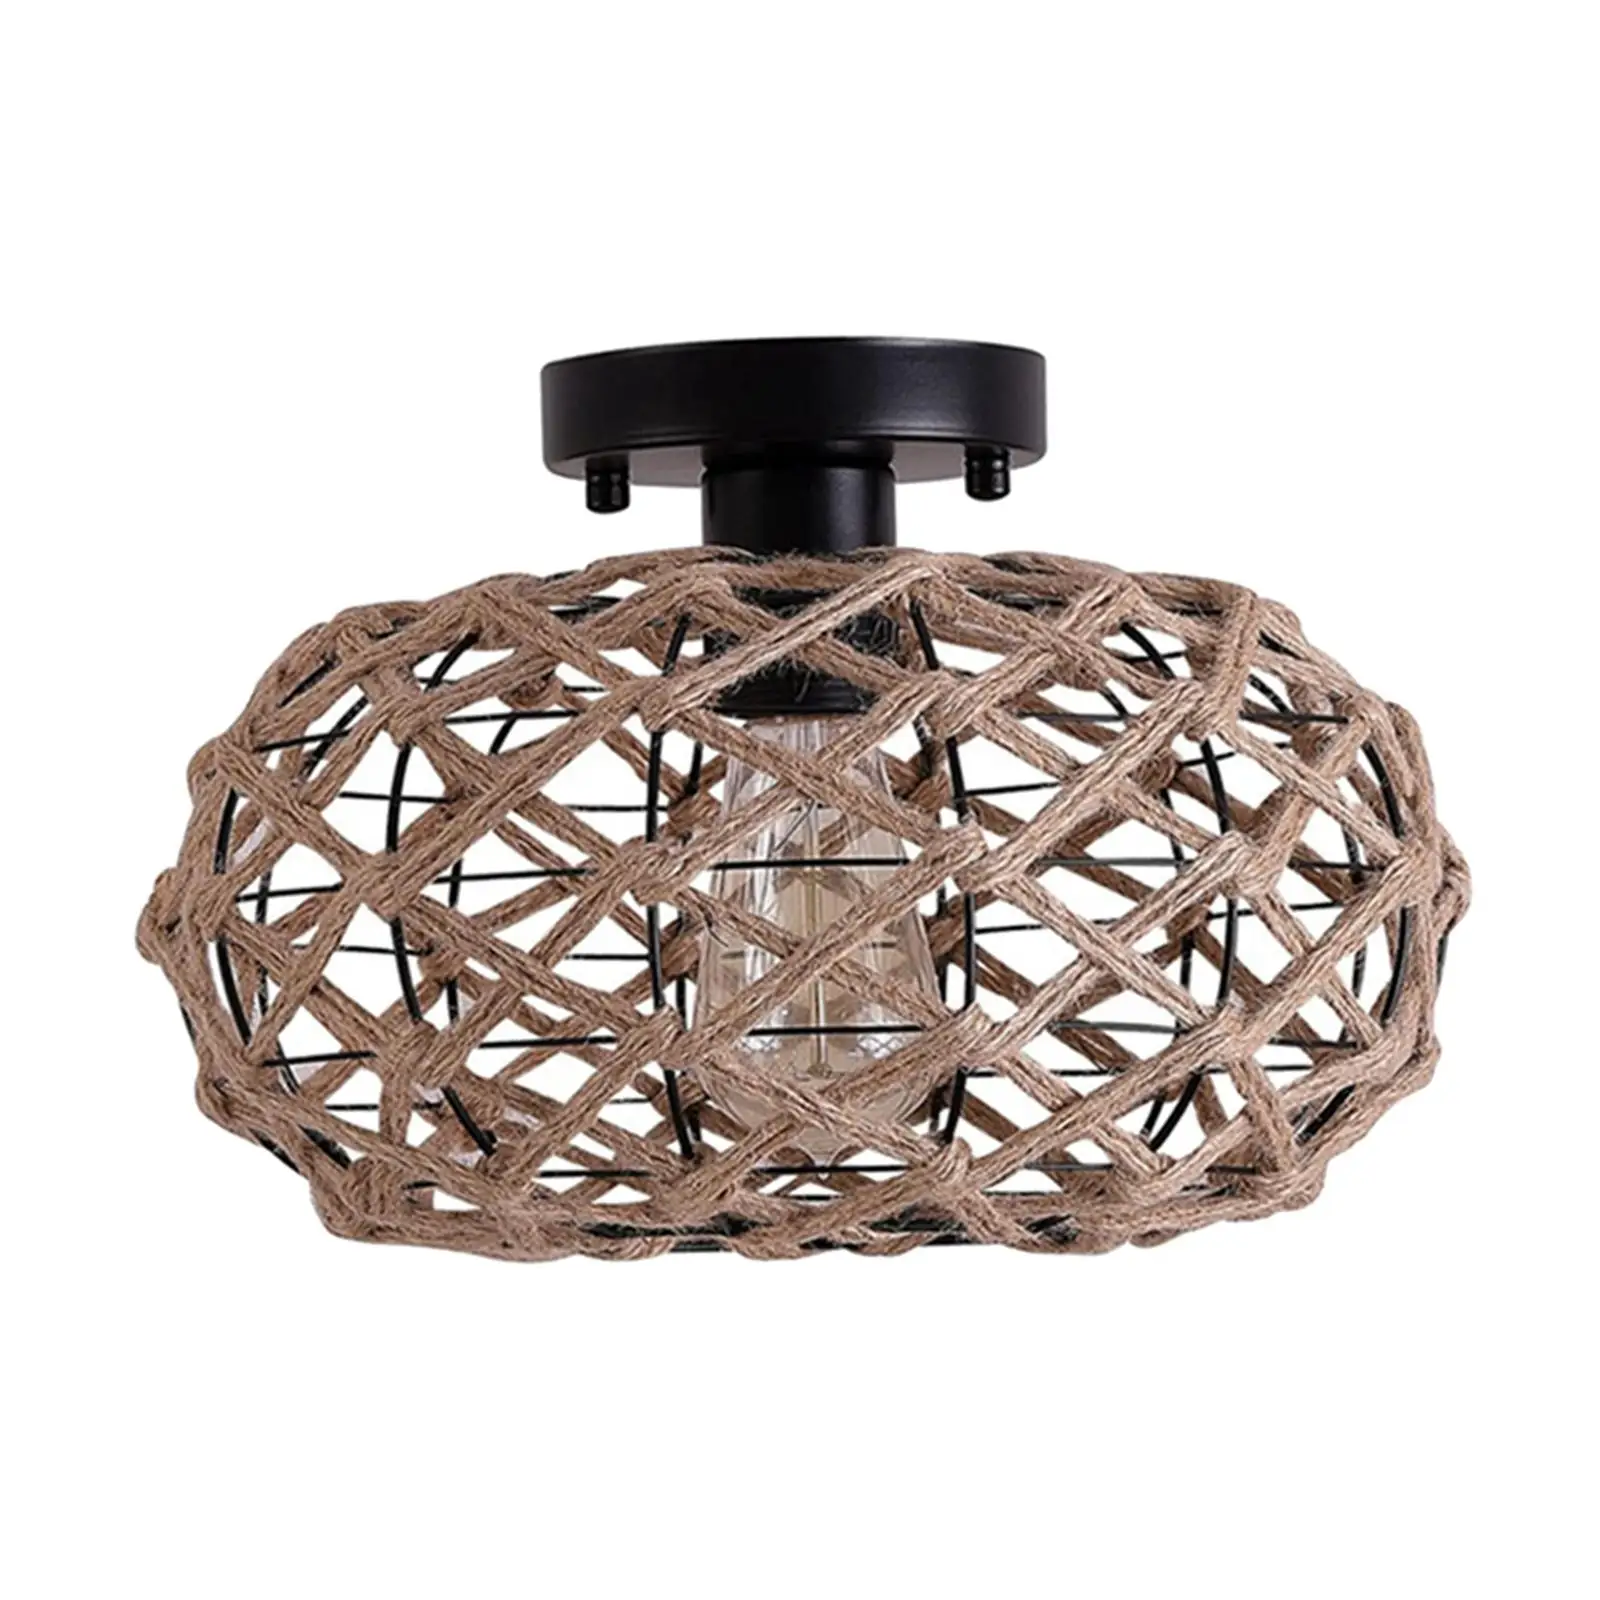 Rustic Woven Lamp Shade Pendant Light Cover for Bedroom Dining Room Kitchen Island